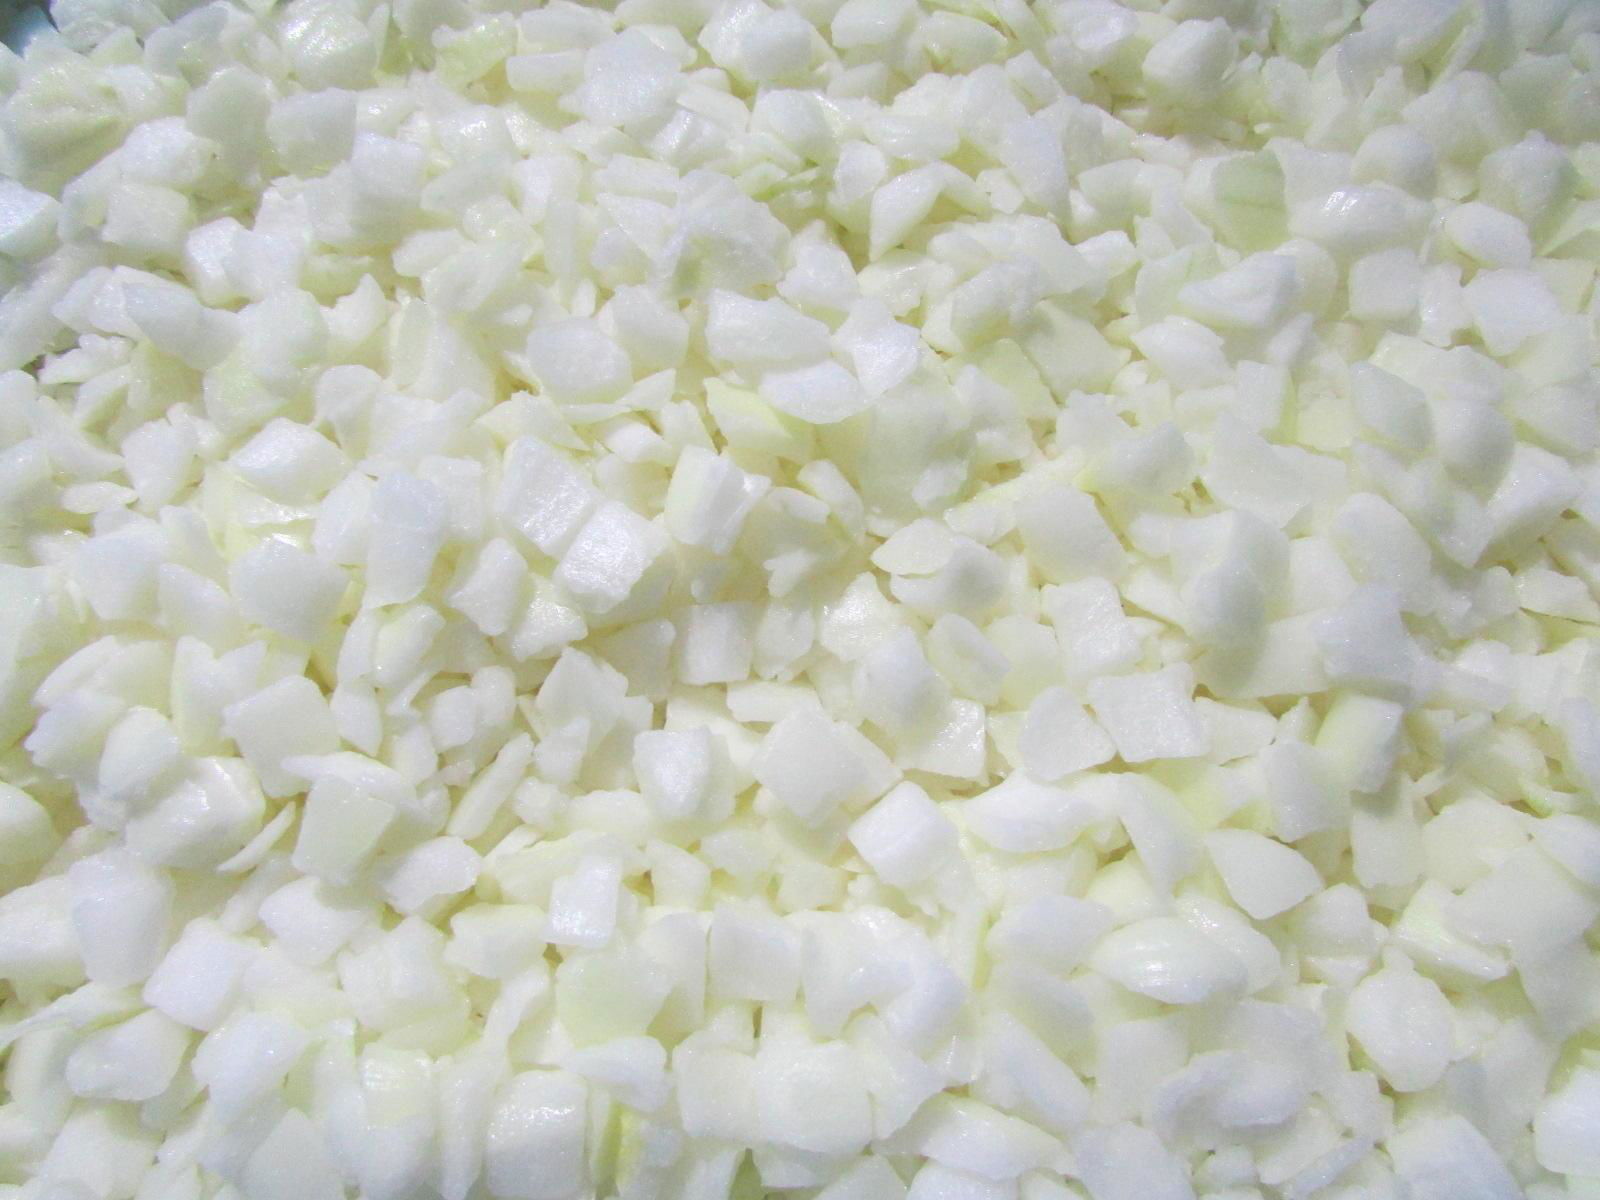 Frozen Onions Dices,IQF Onion Dices,Frozen Diced Onions,IQF Diced Onions 2